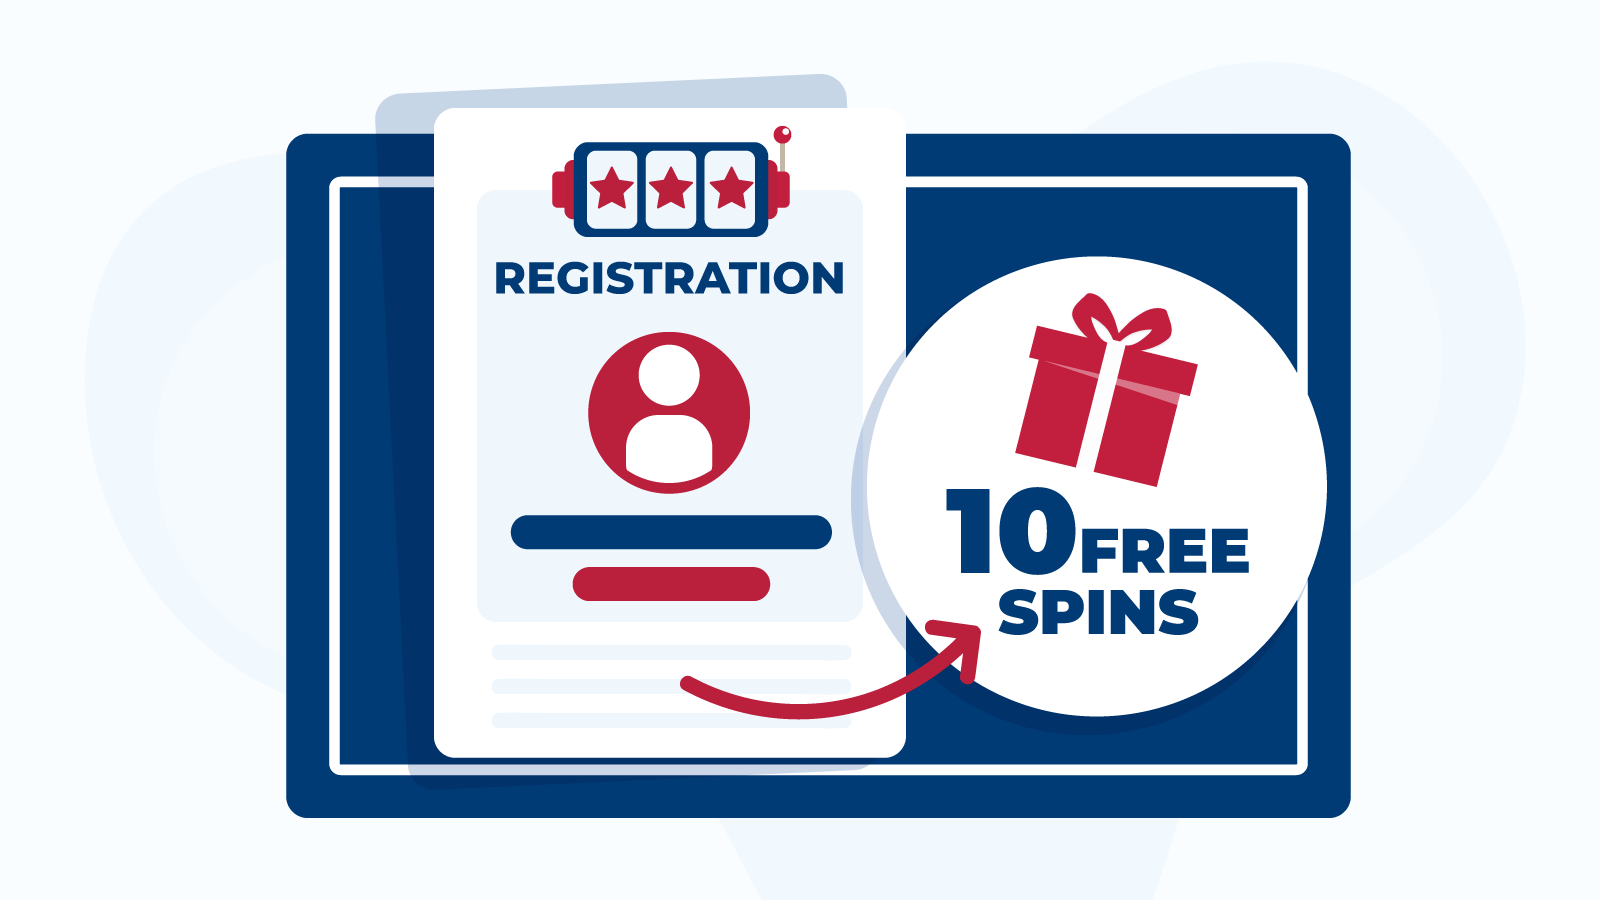 How to Get 10 Free Spins on Registration in 2022